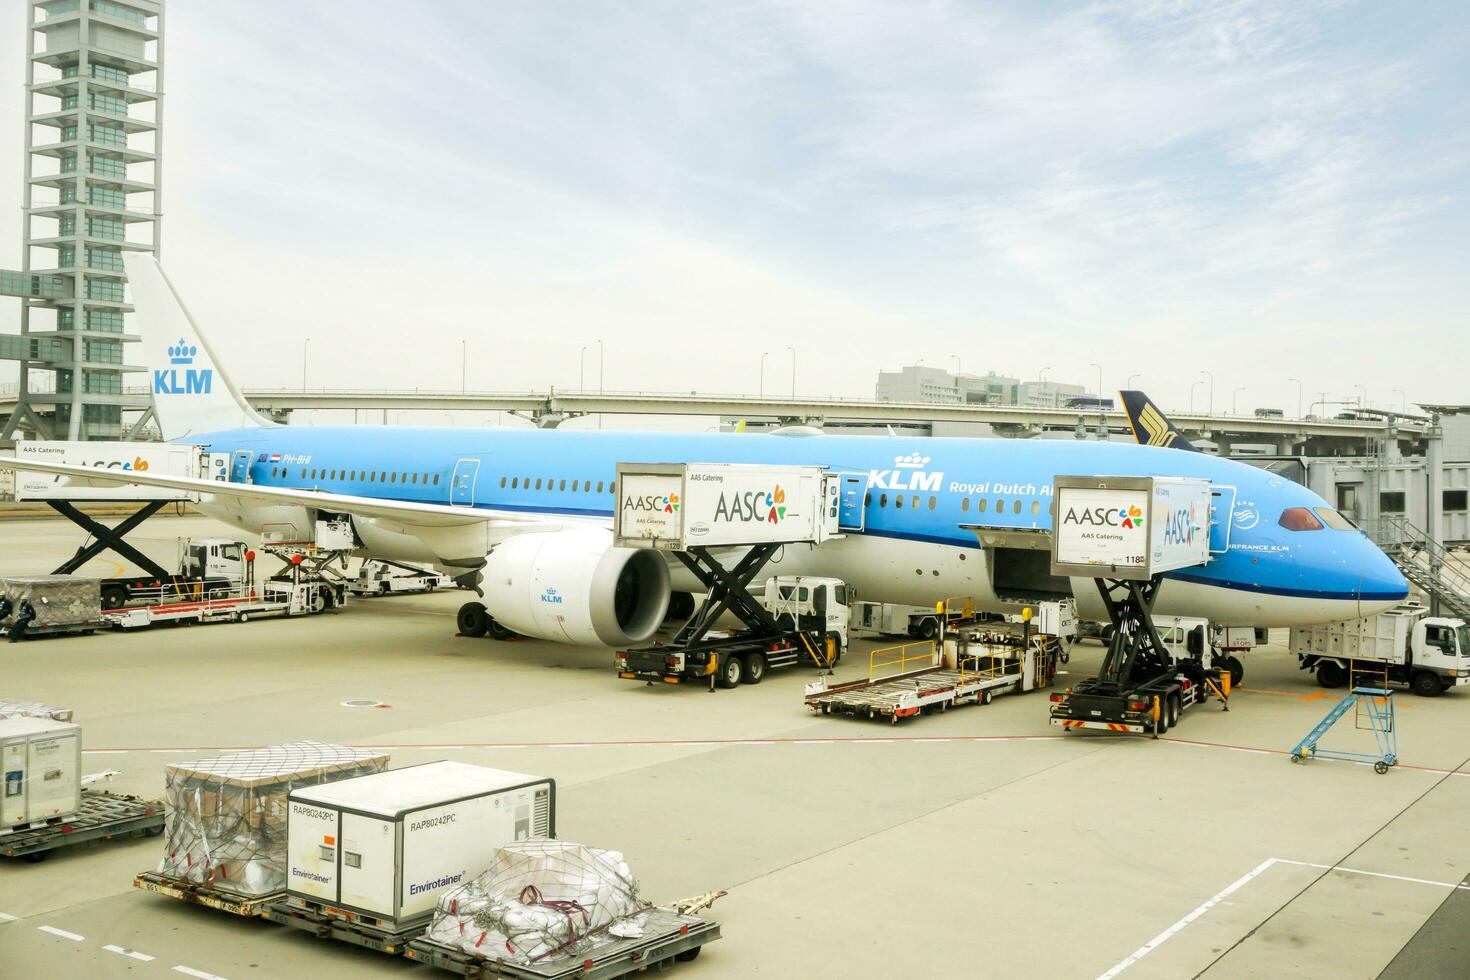 Osaka City, Japan, 2018 - Blue airplane of KLM Royal Dutch Airline arriving at Kansai International Airport, Japan with loading baggage and travelers from the plane to the terminal. photo